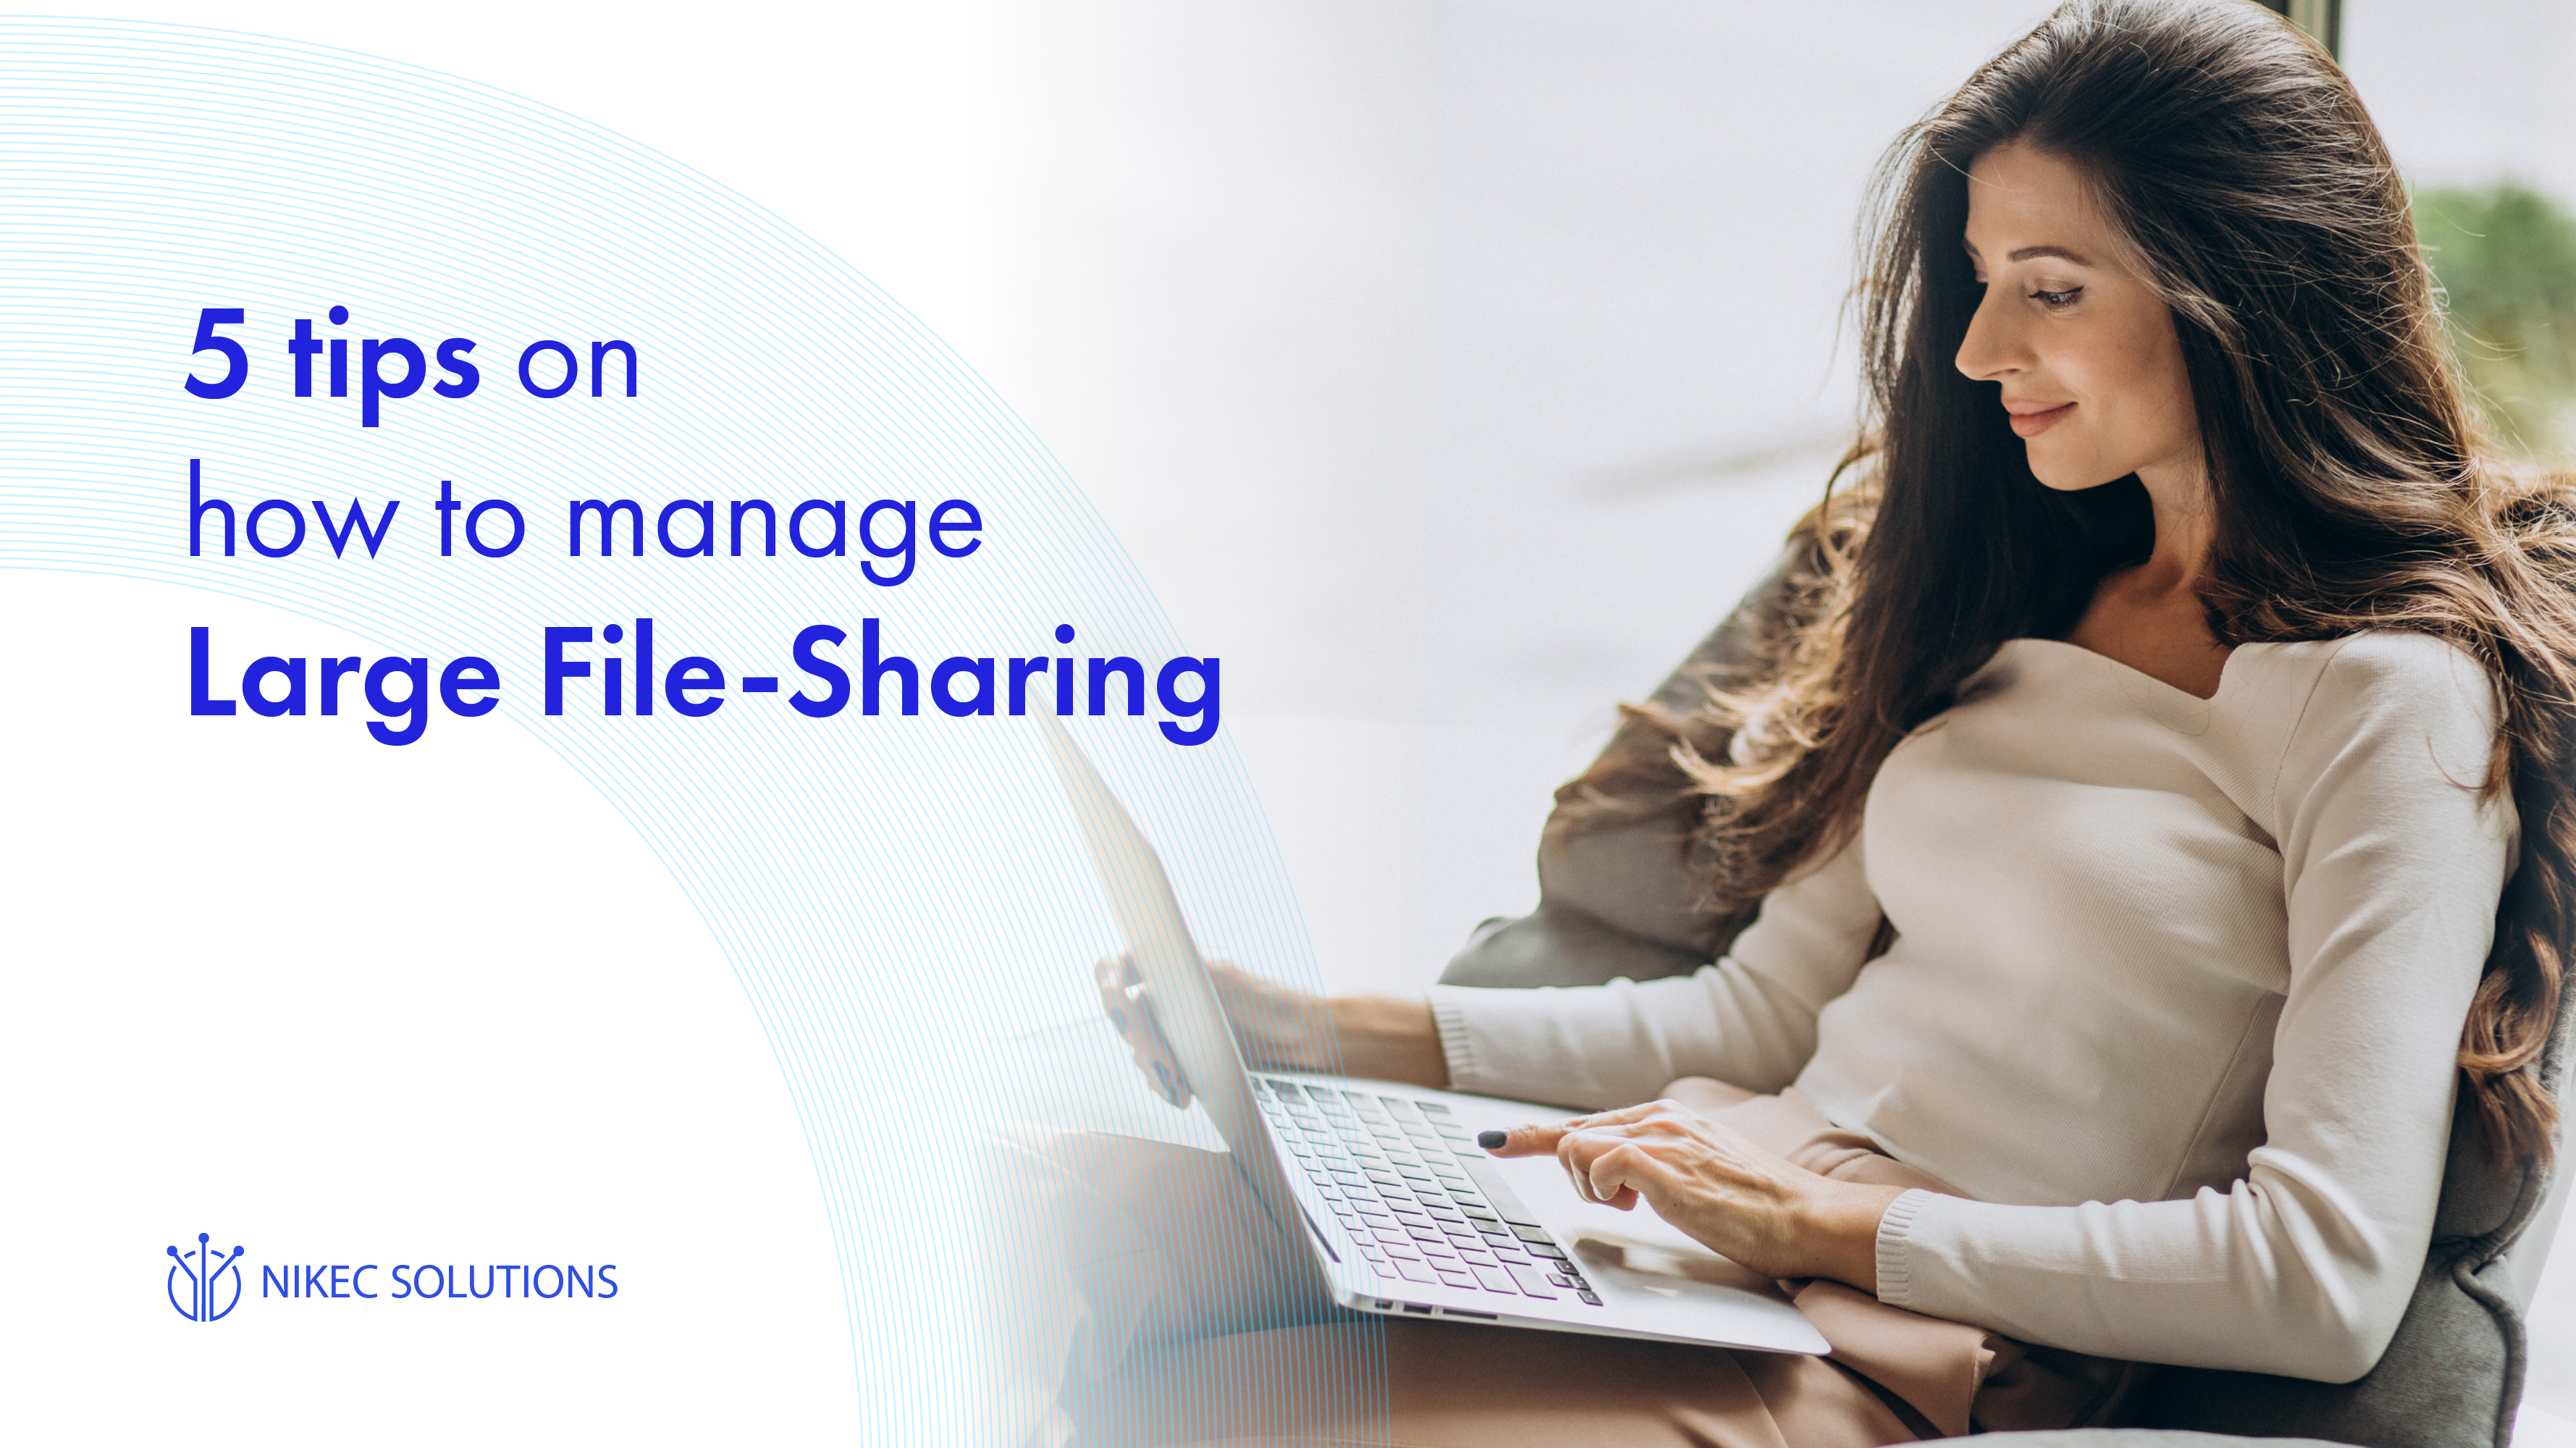 5 tips on how to manage large file-sharing